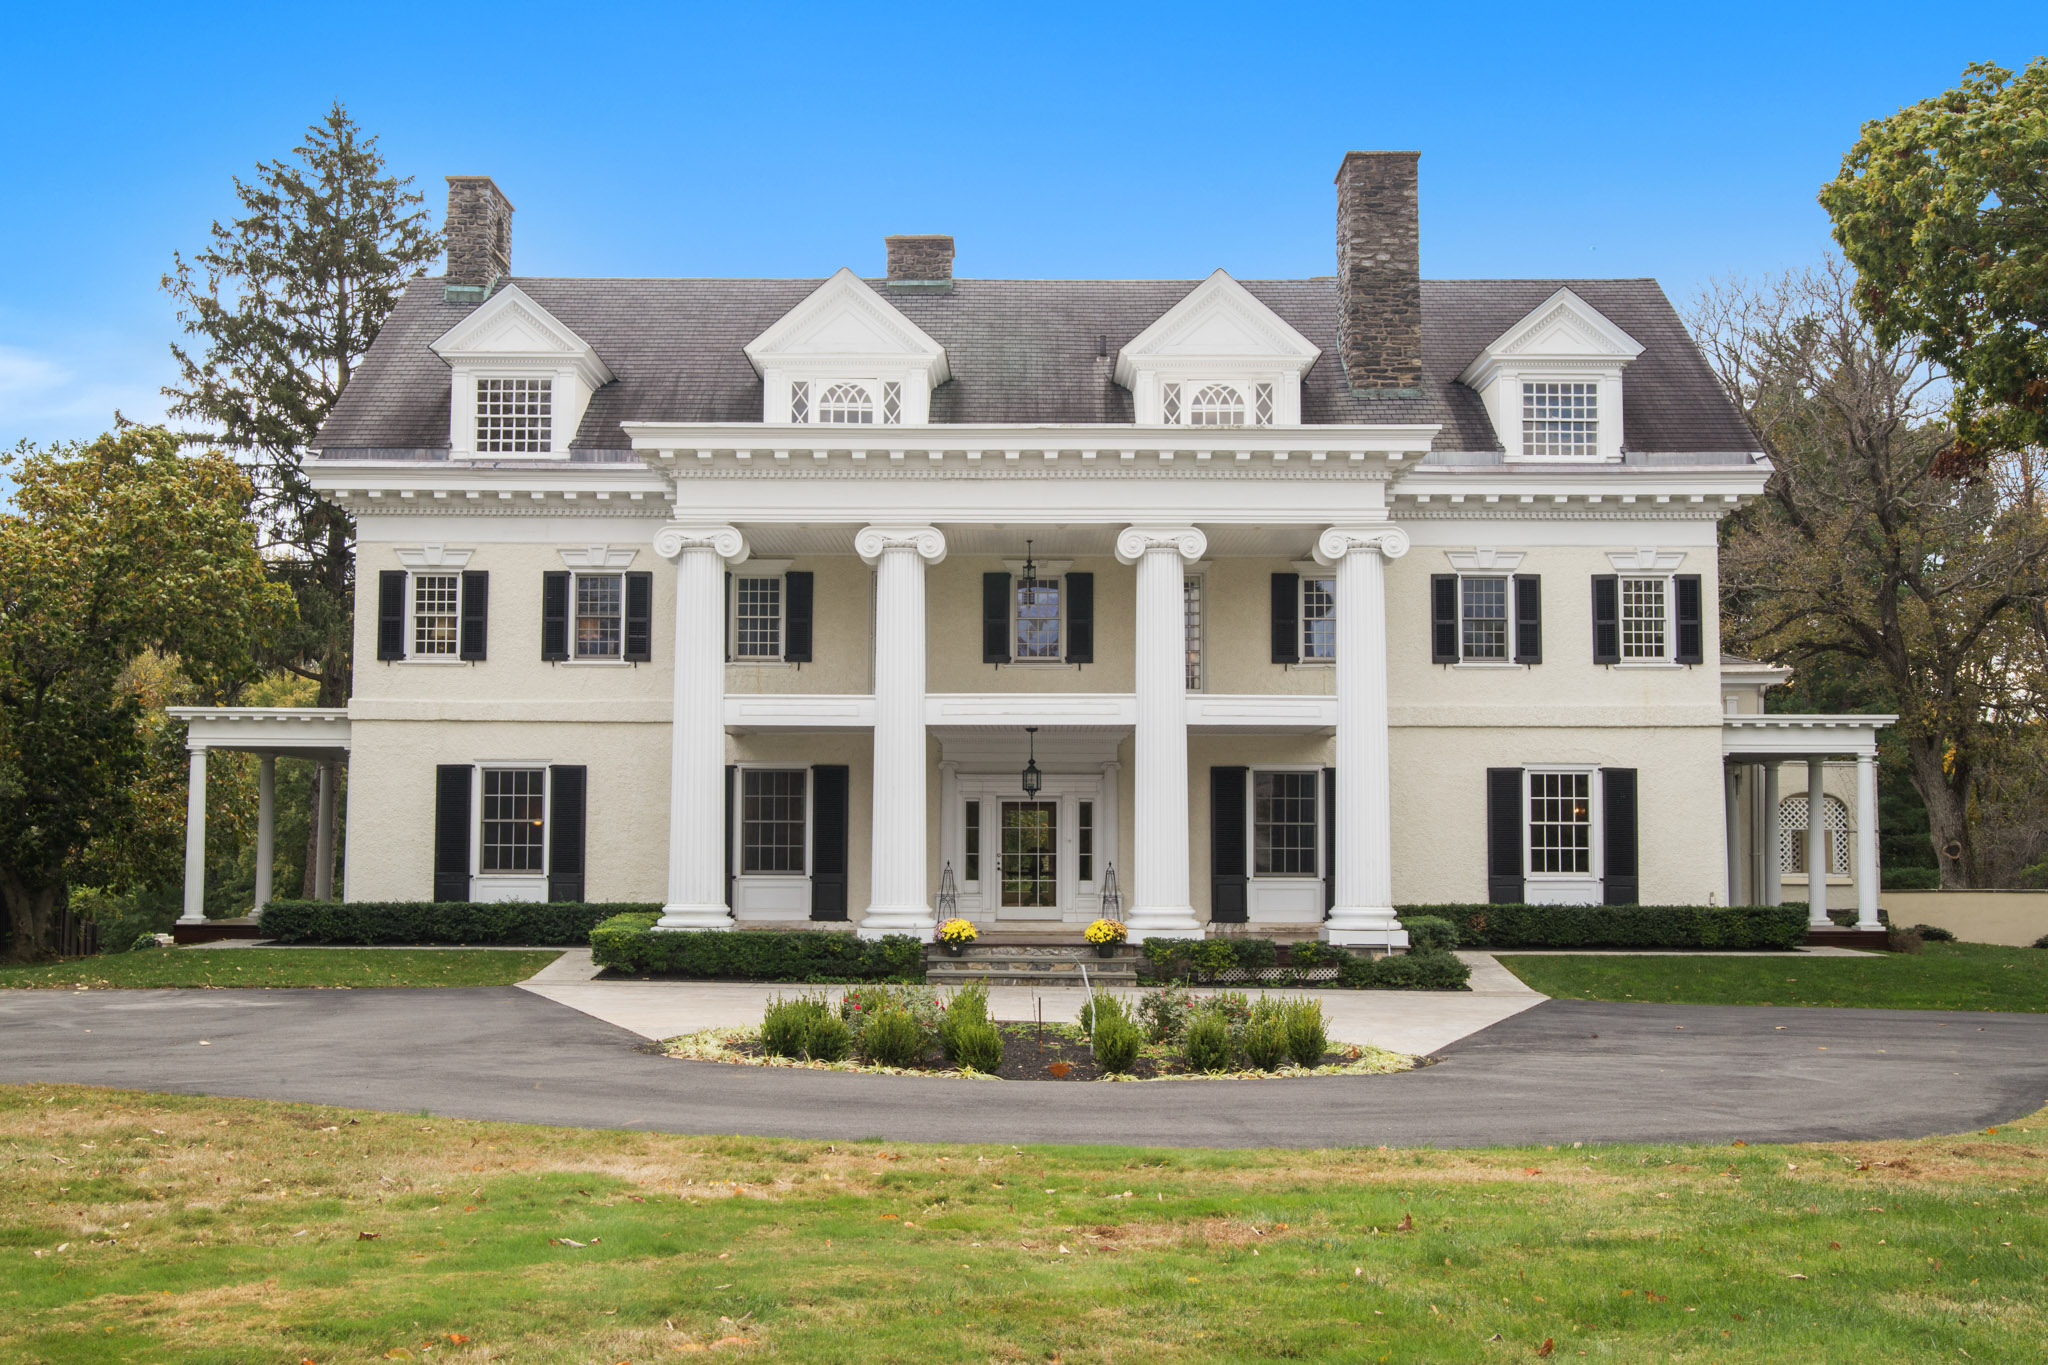 A classic mansion with Greek columns.